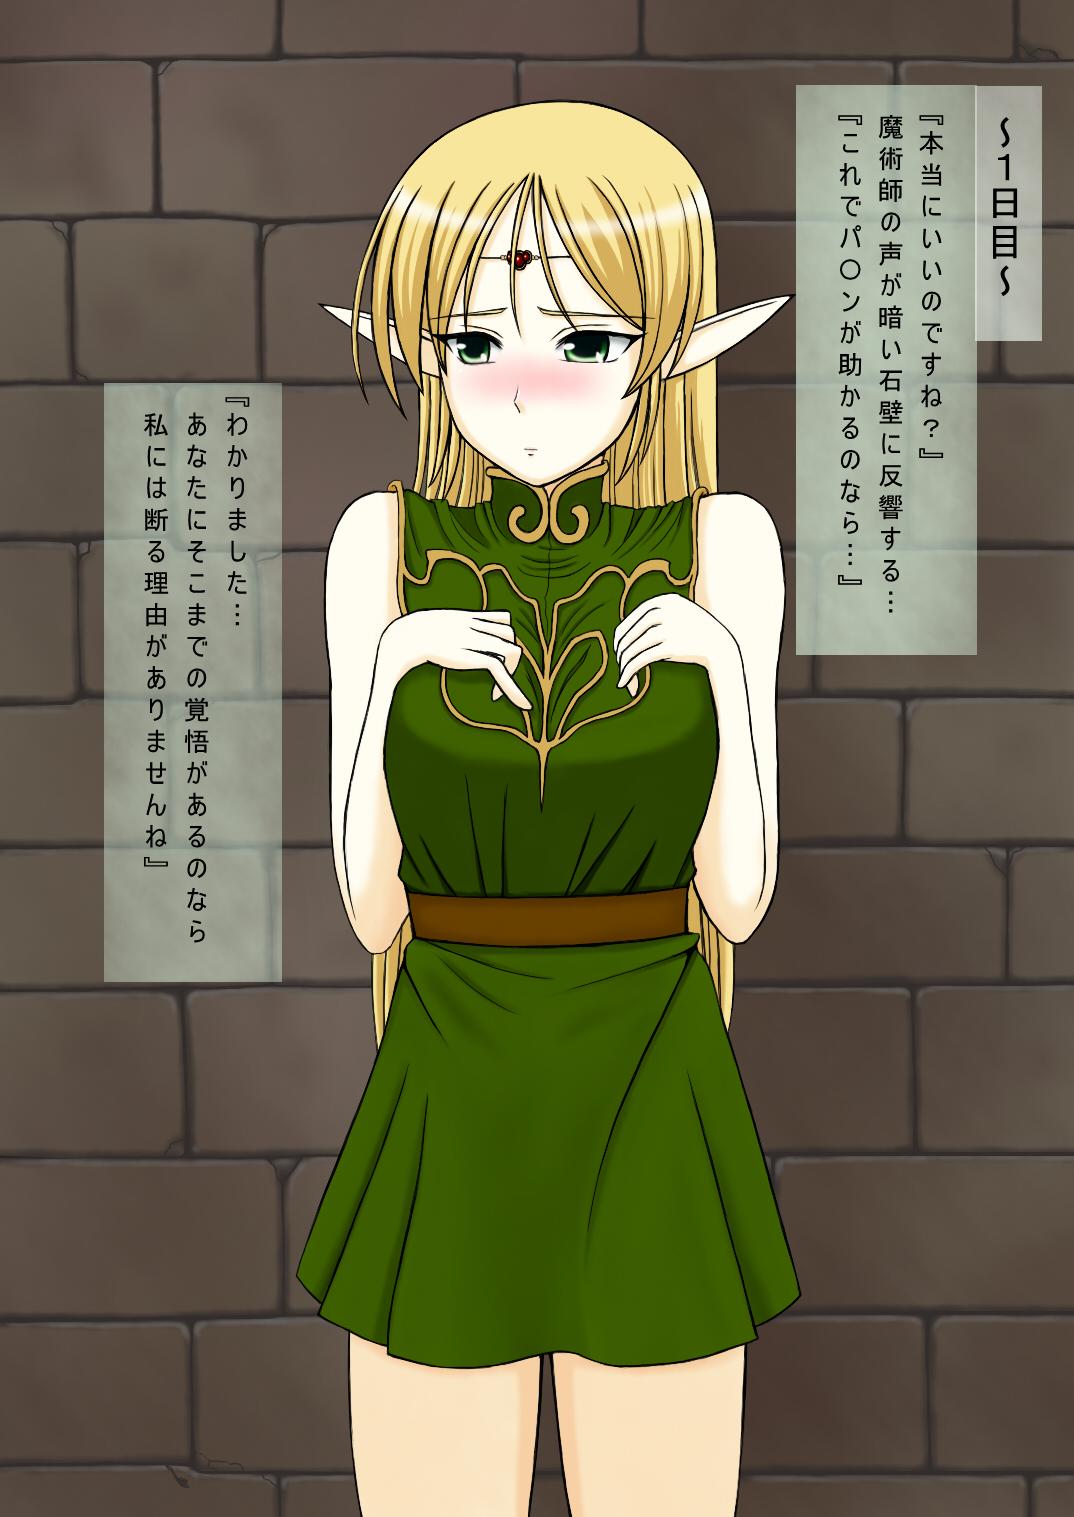 [Uosao] Record of Lodoss War ~Heroine Insult Collection IV~ Cum on the blonde elf (Record of Lodoss War) 0